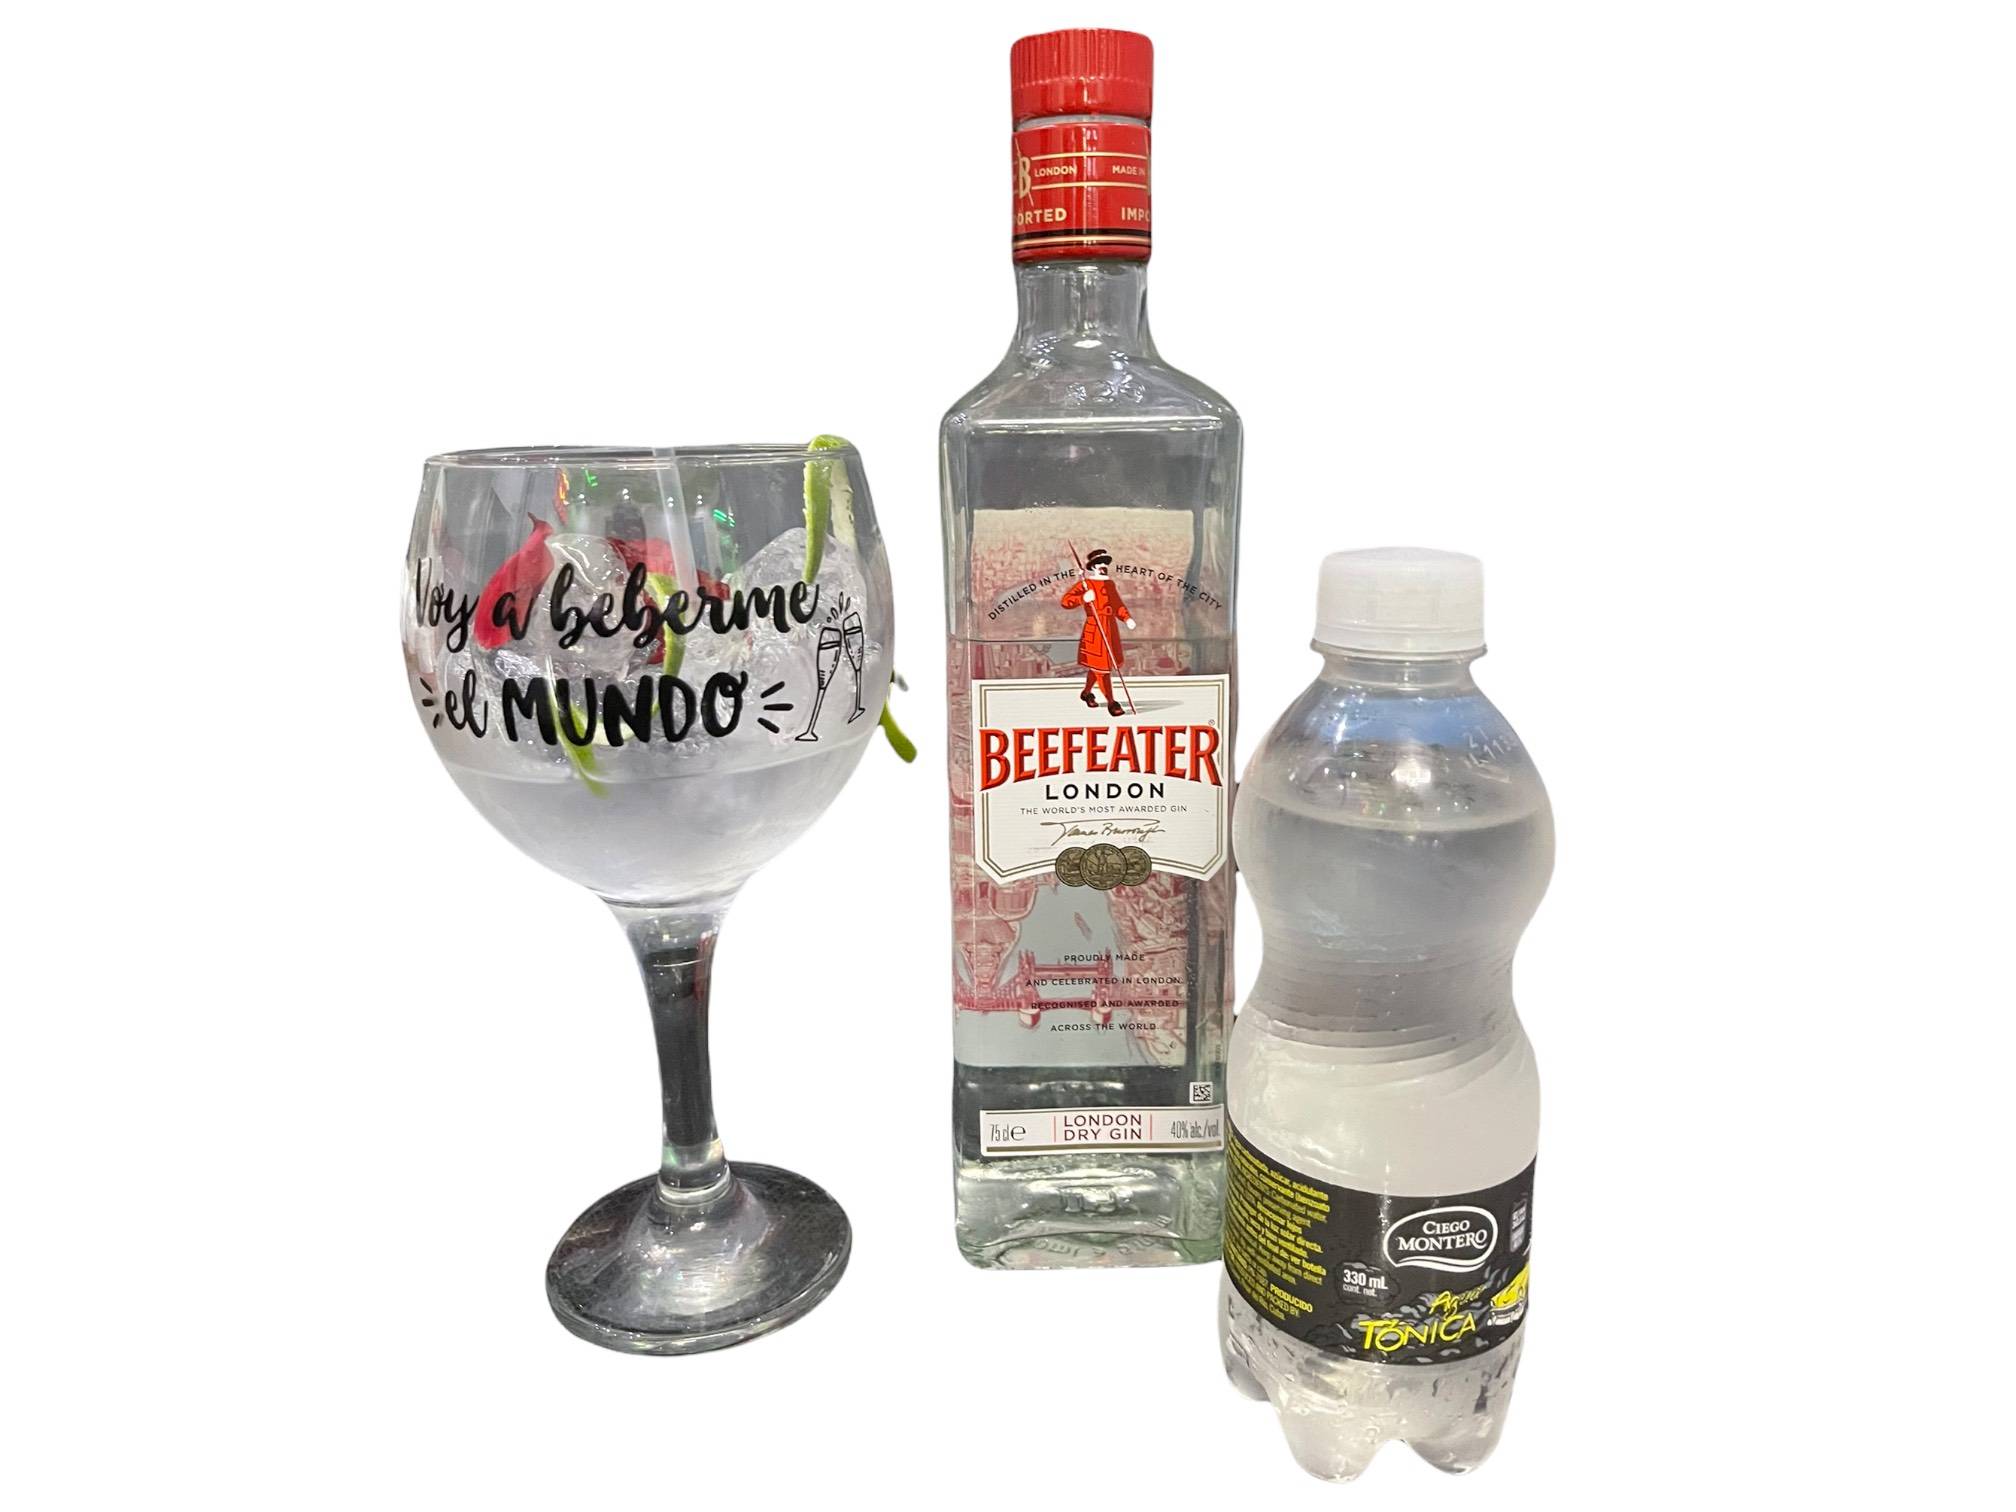  Gin tonic beefeater